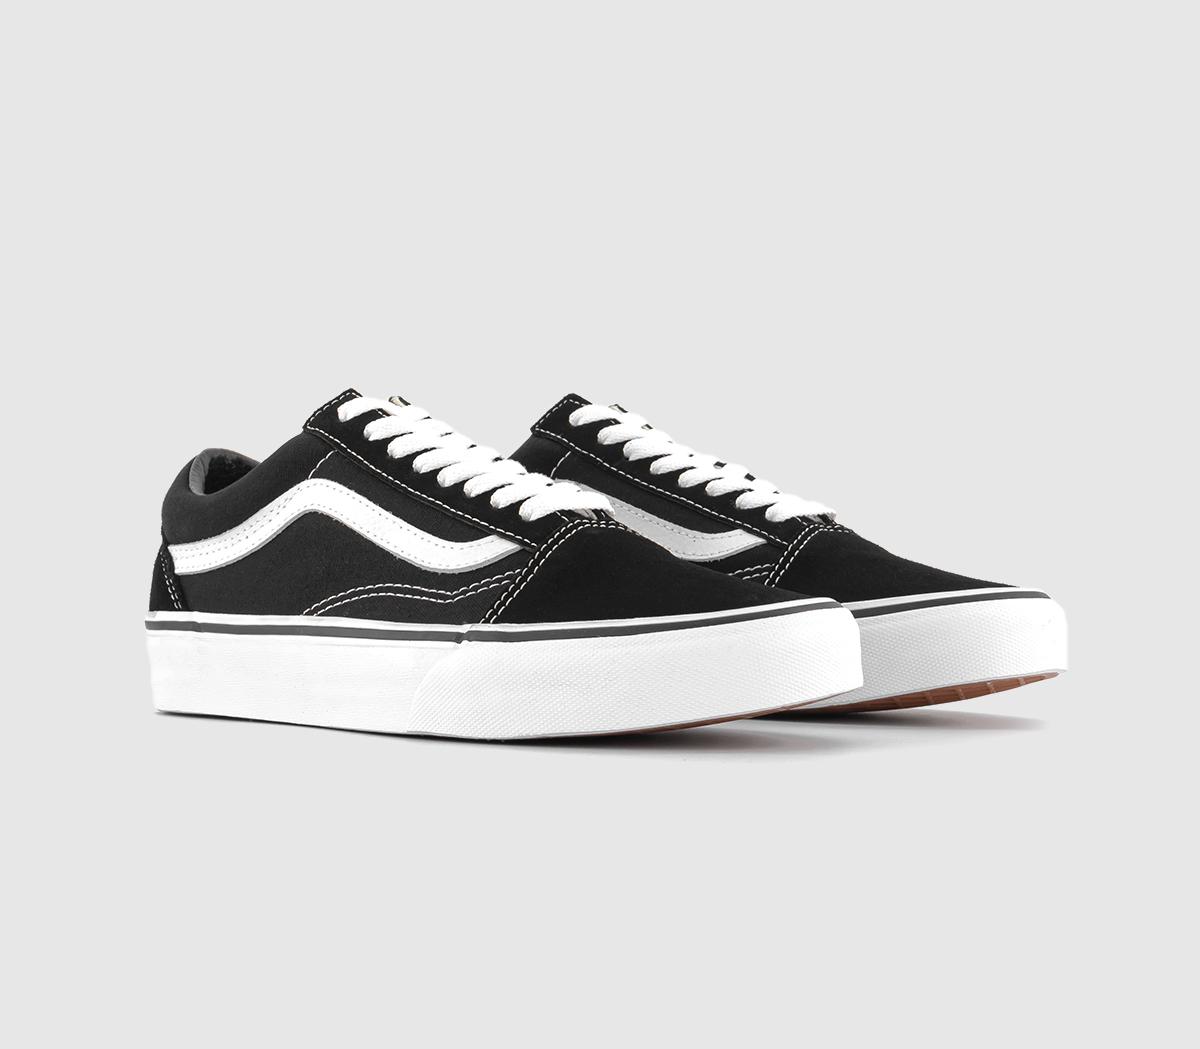 Vans Old Skool Black And White Canvas Trainers, Size: 4.5